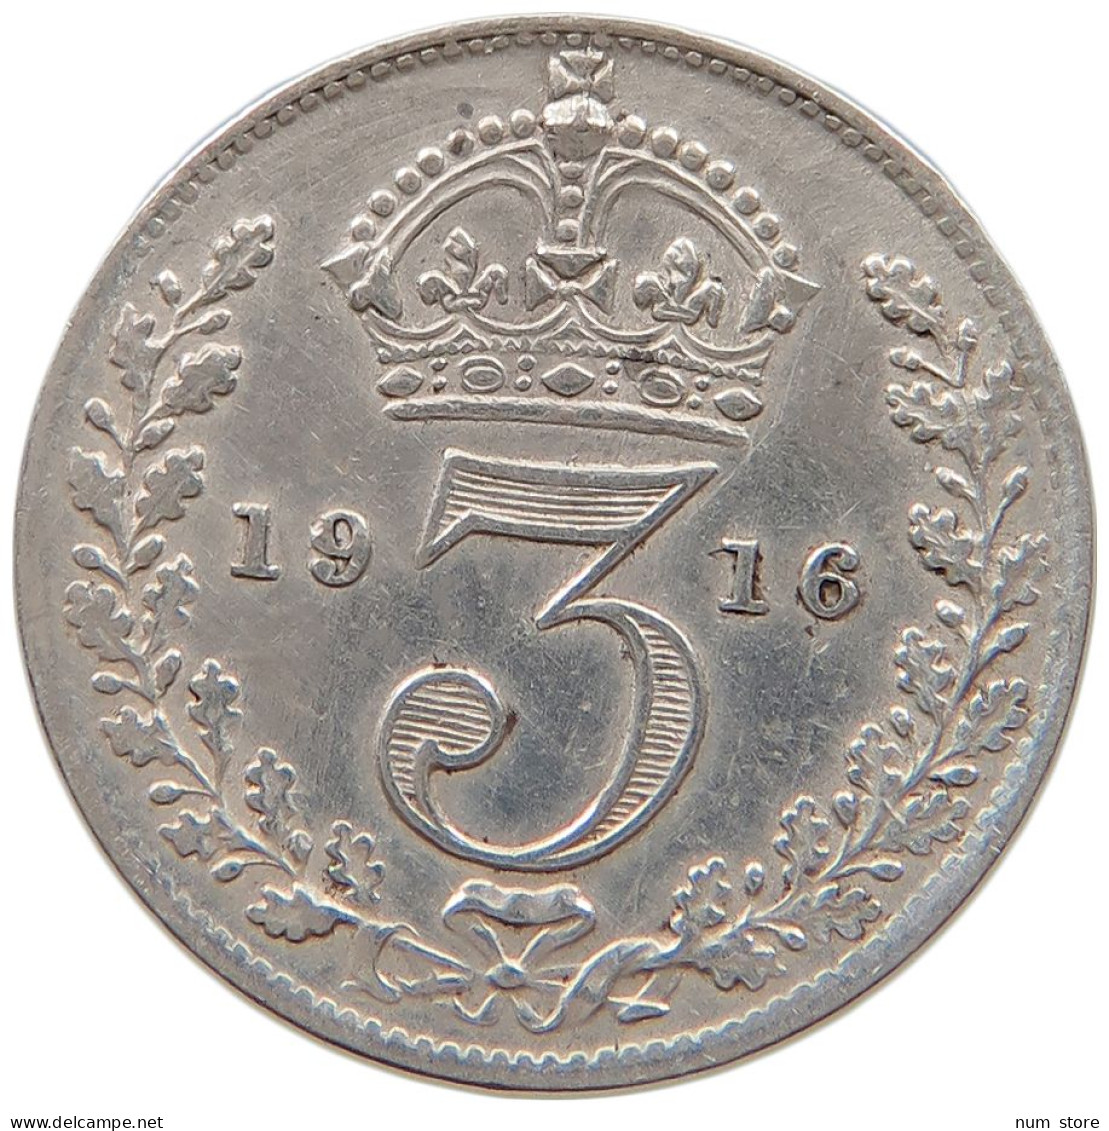 GREAT BRITAIN THREEPENCE 1916 George V. (1910-1936) #a063 0603 - F. 3 Pence